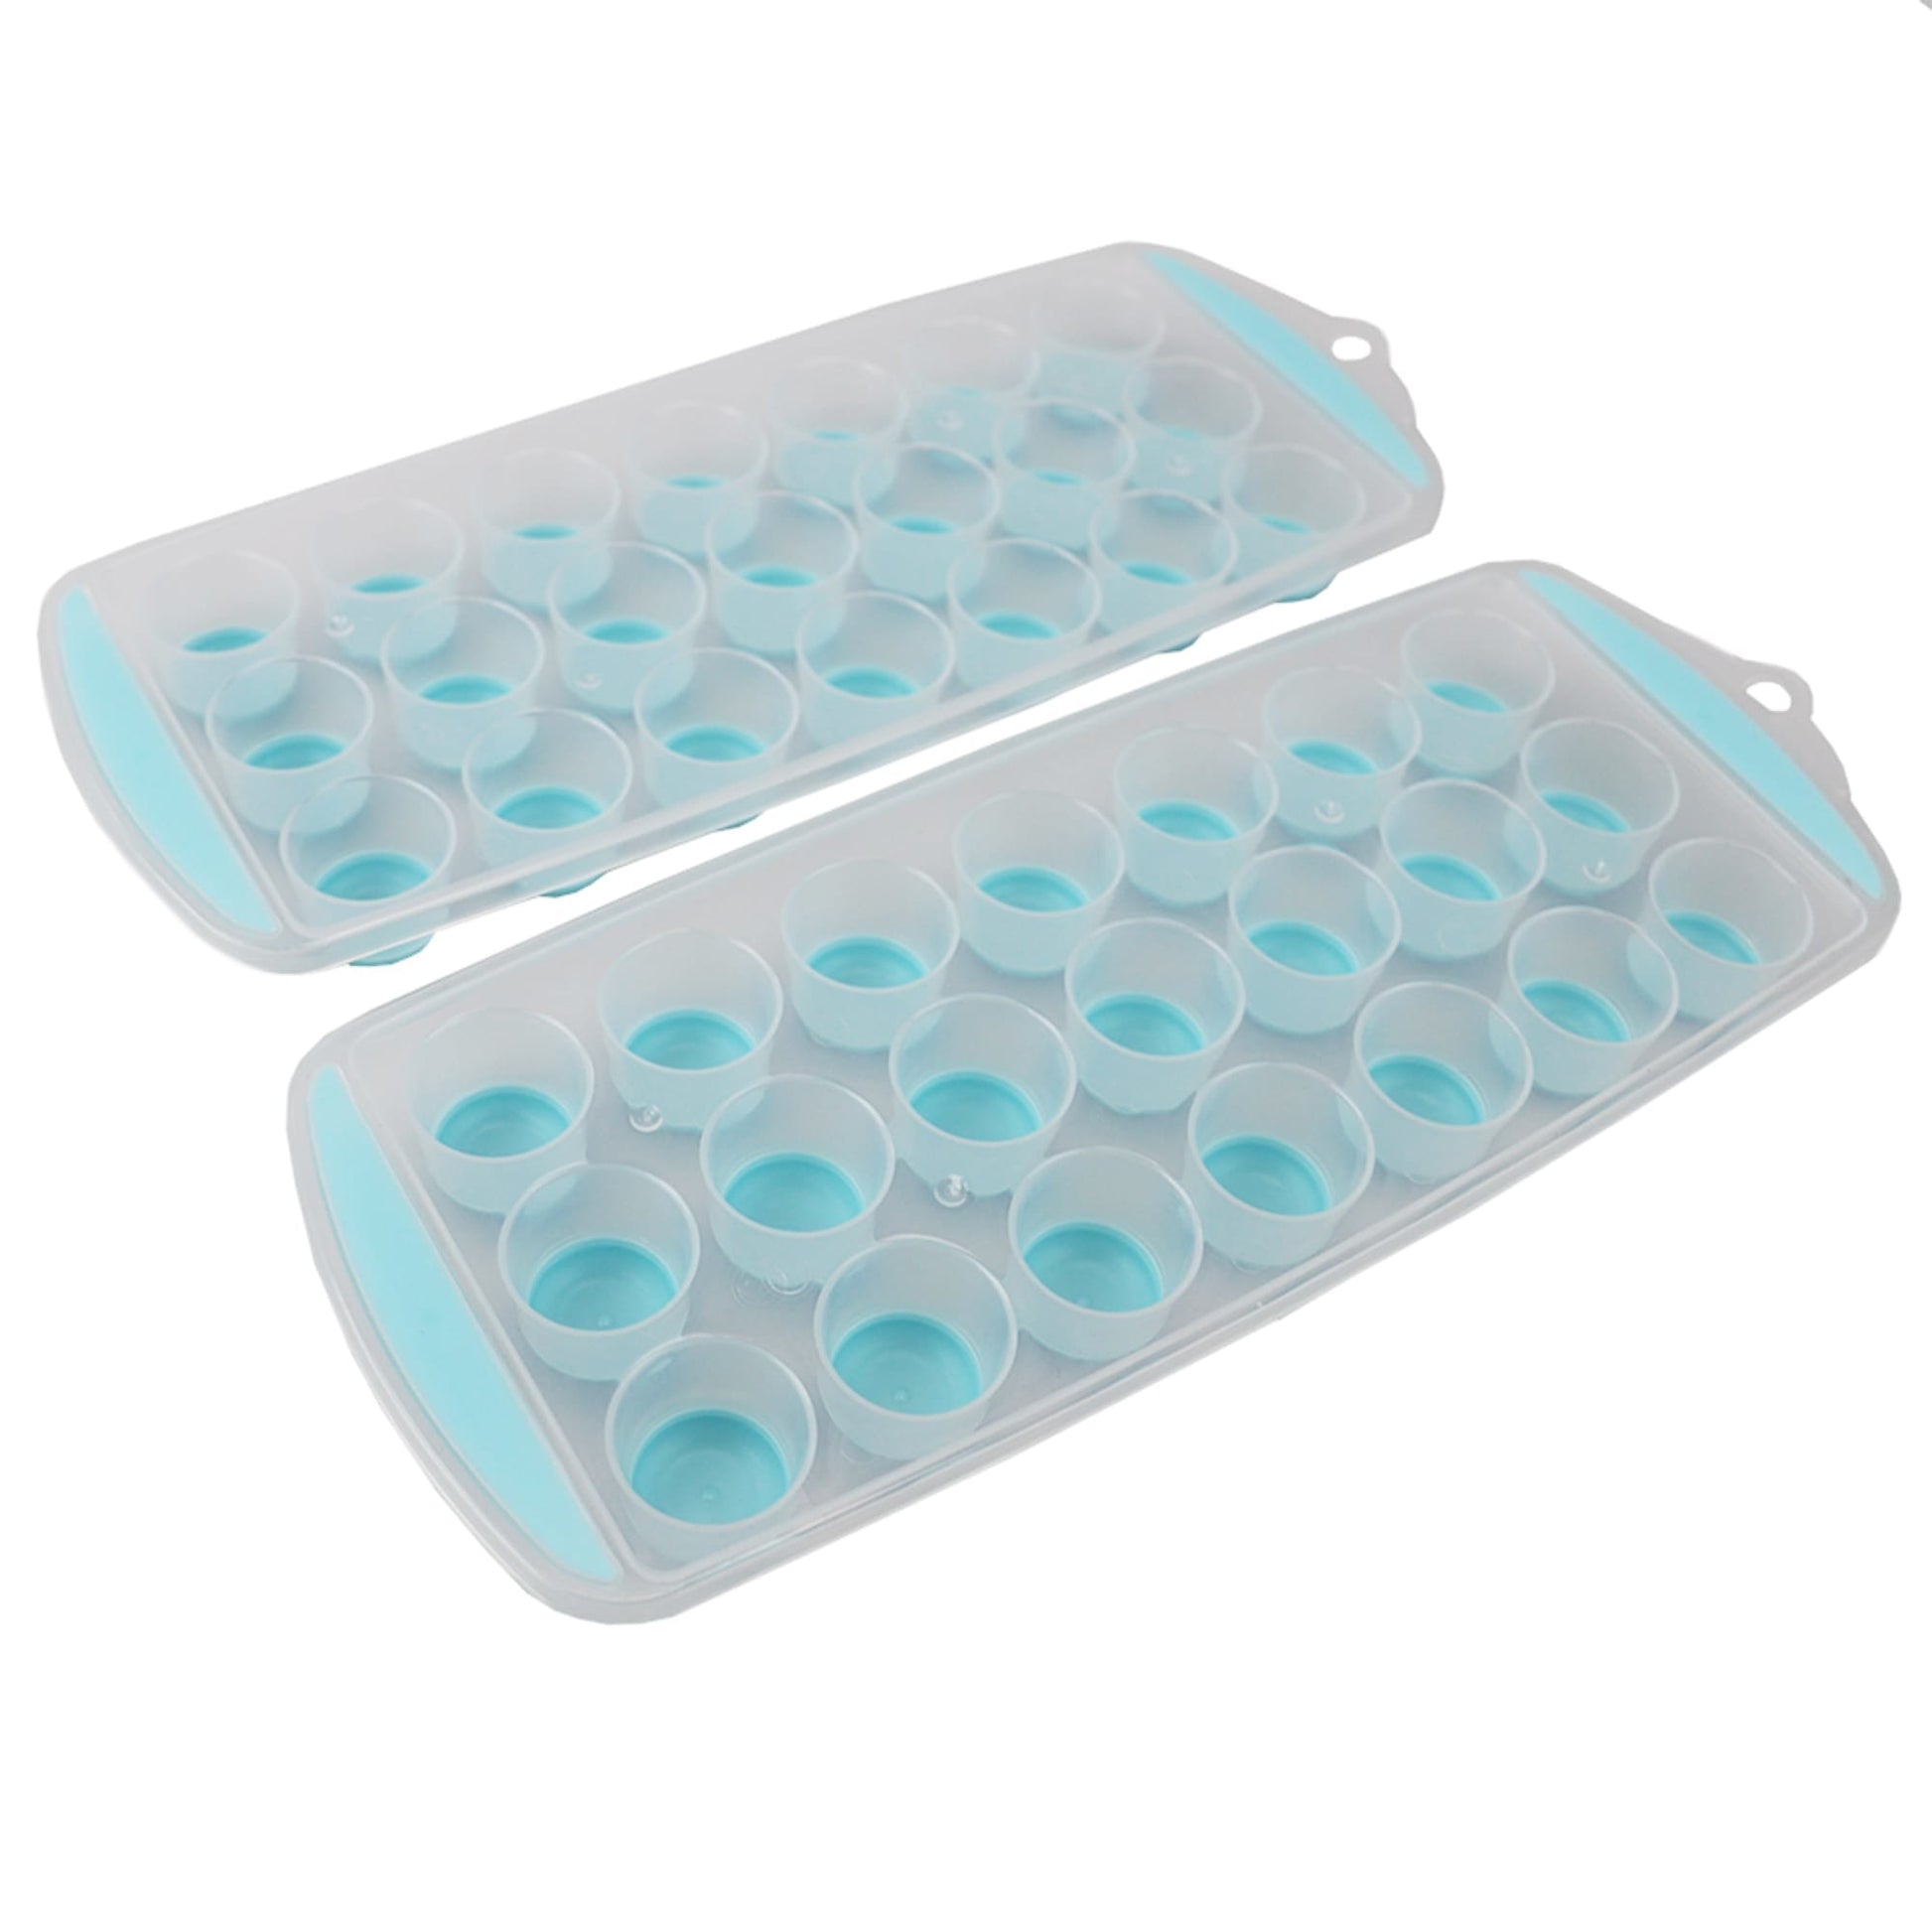 Cozy Kitchen Essentials CKE Mini Ice Cube Tray with Bin, 104 Pcs Tiny Pebble Ice Tray for Freezer with Ice Bin, Ice Scoop and Stainless Steel Straw, Crushed Easy Release